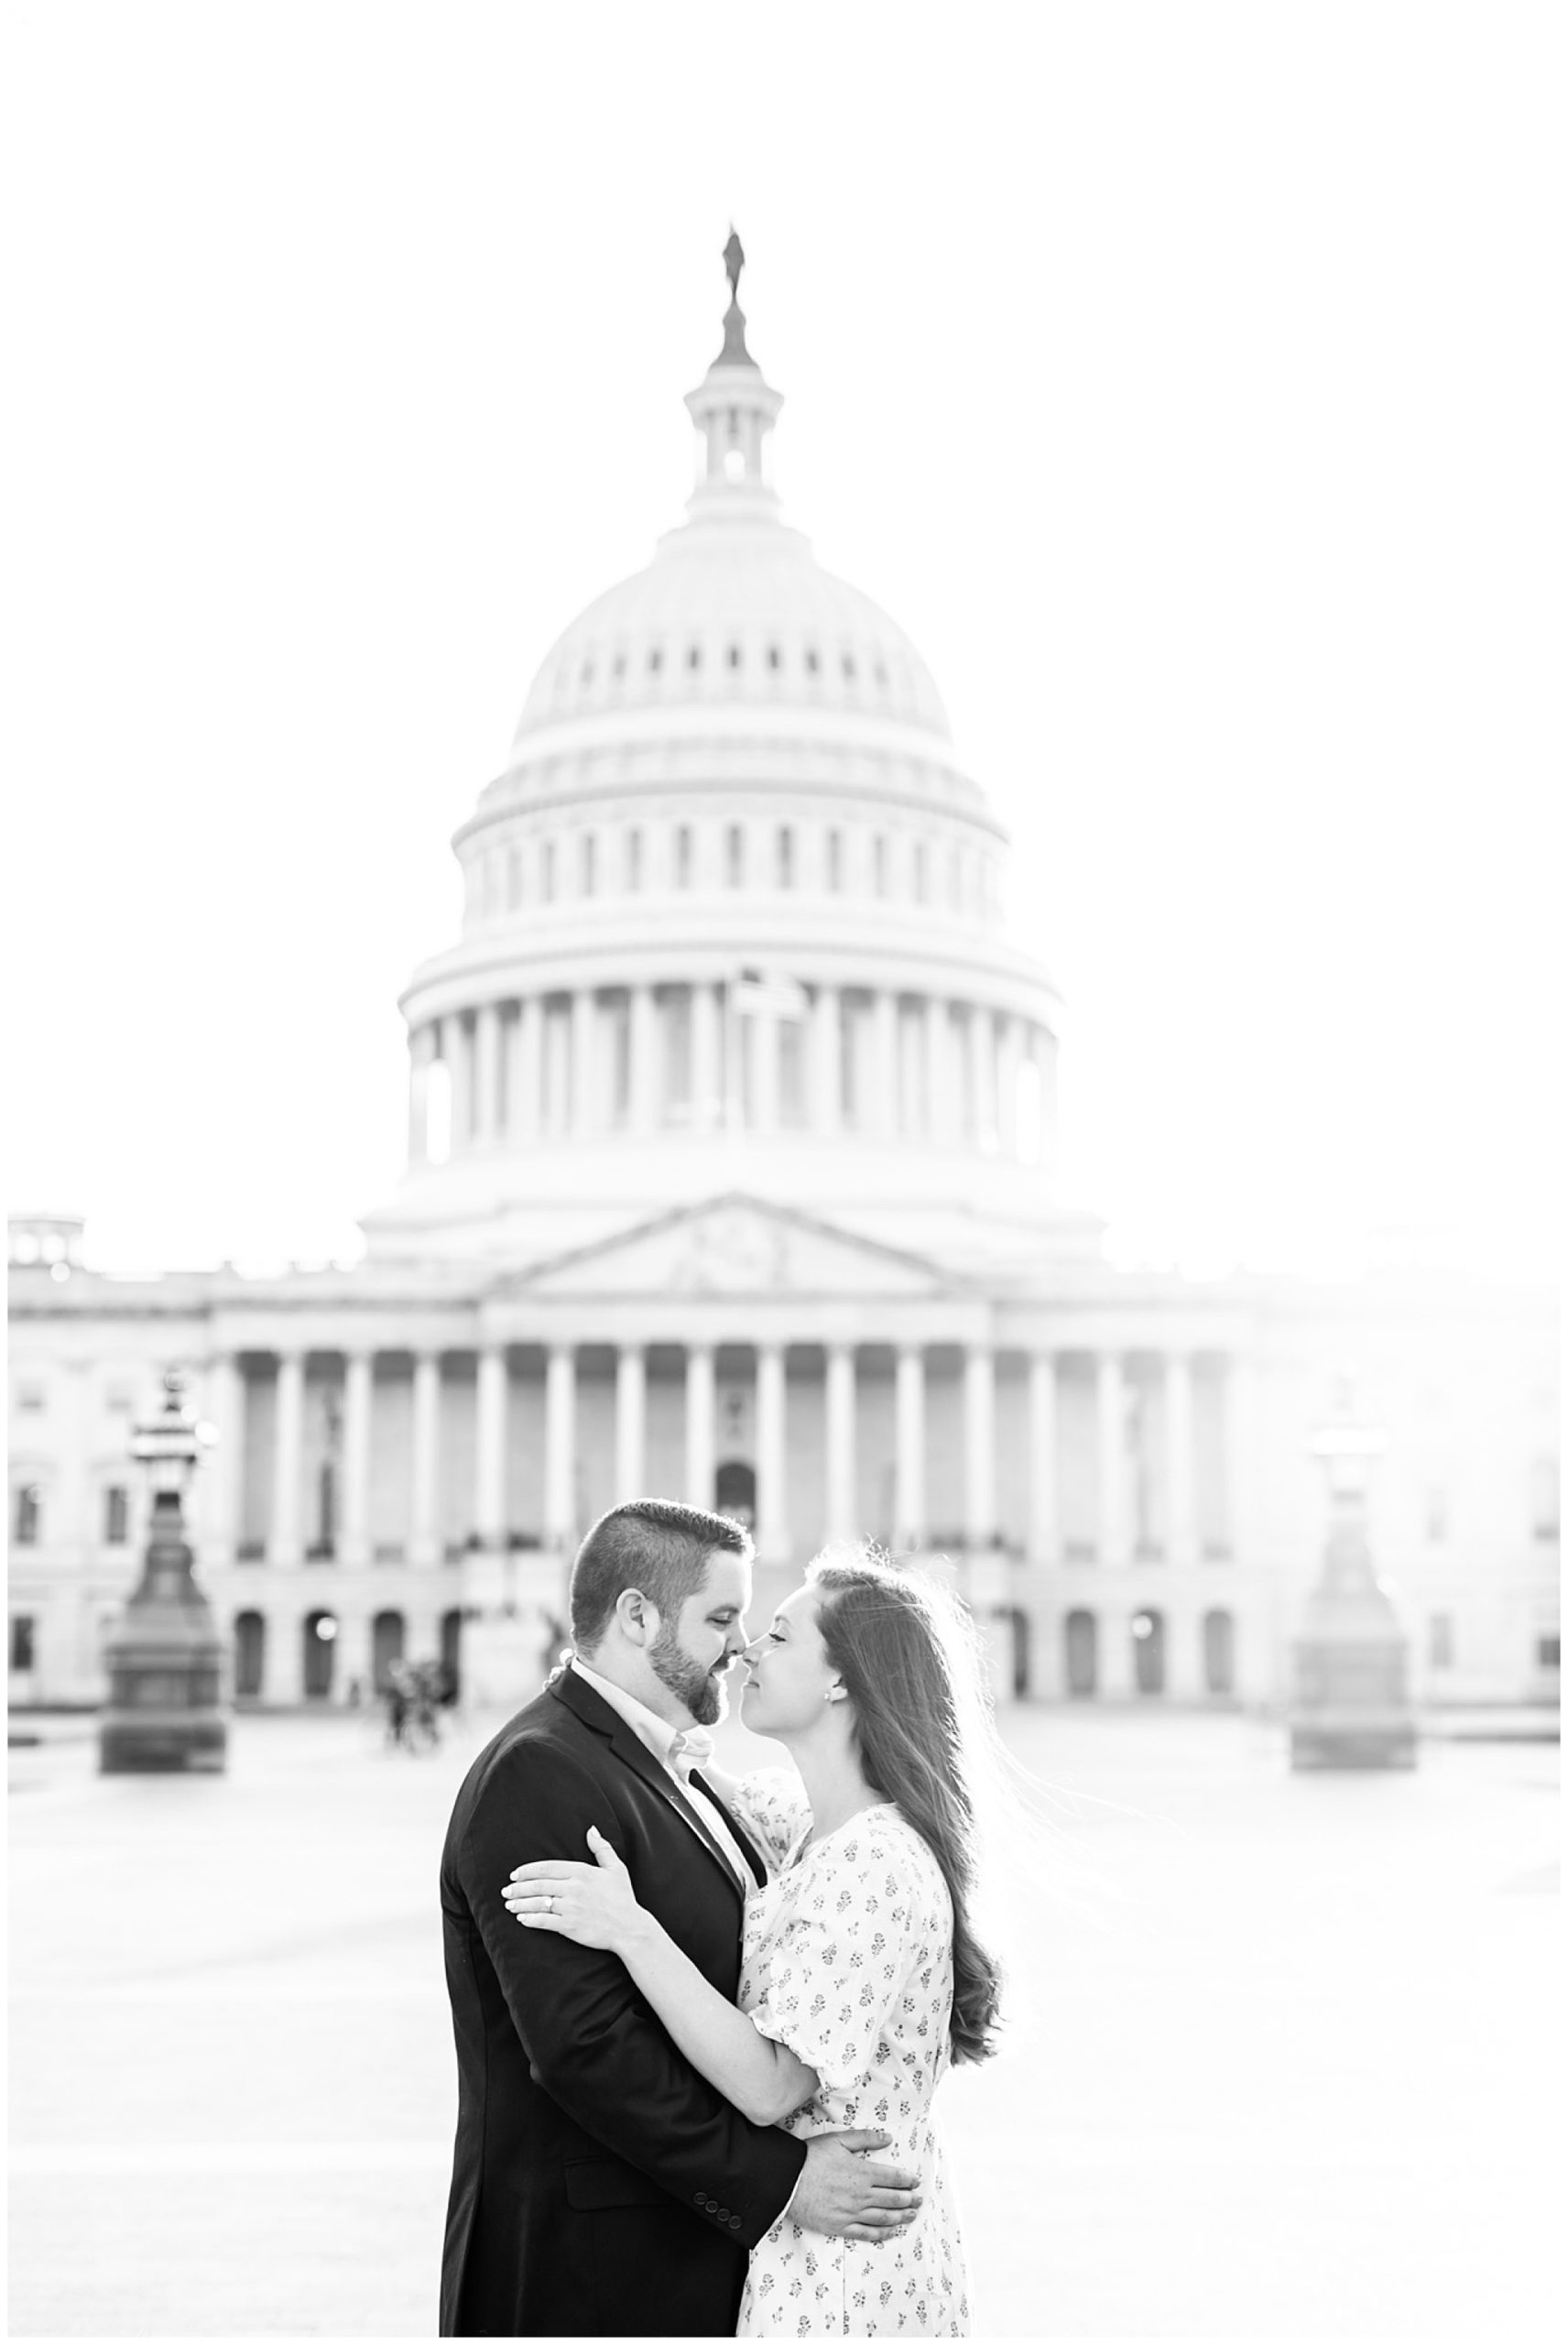 Capitol Hill engagement session, Capitol Hill portraits, D.C. engagement photography, D.C. engagement photographer, D.C. Capitol Hill D.C., DC photography, engagement photography, Rachel E.H. Photography, classic engagement photos, spring engagement photos, black and white engagement photo